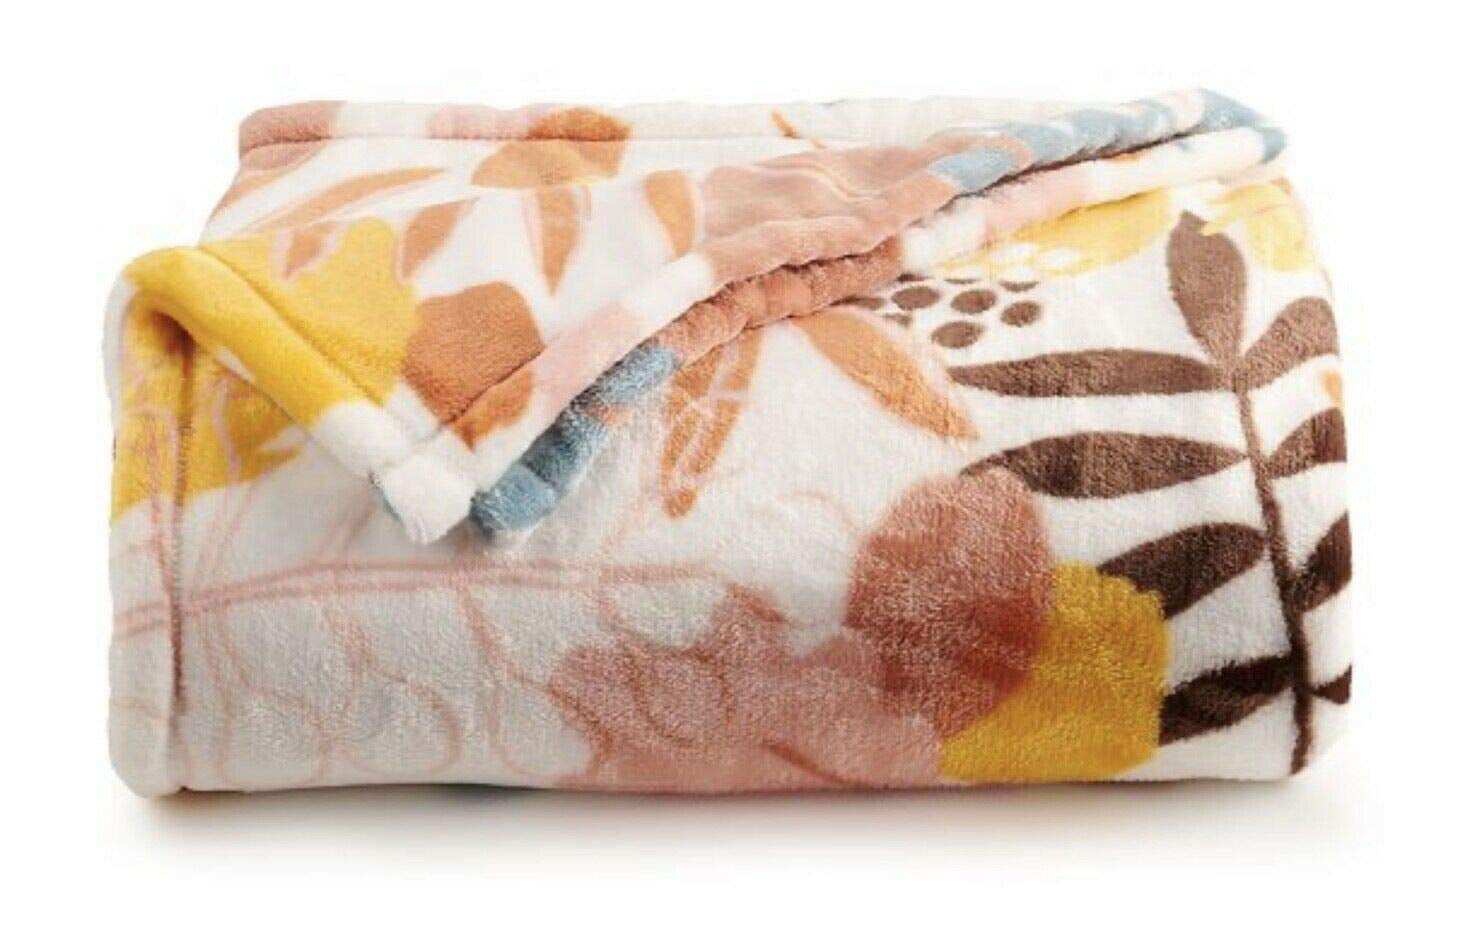 The Big One Plush Oversized Throw Super Soft TERRACOTTA CARVE 5' X 6' NEW 